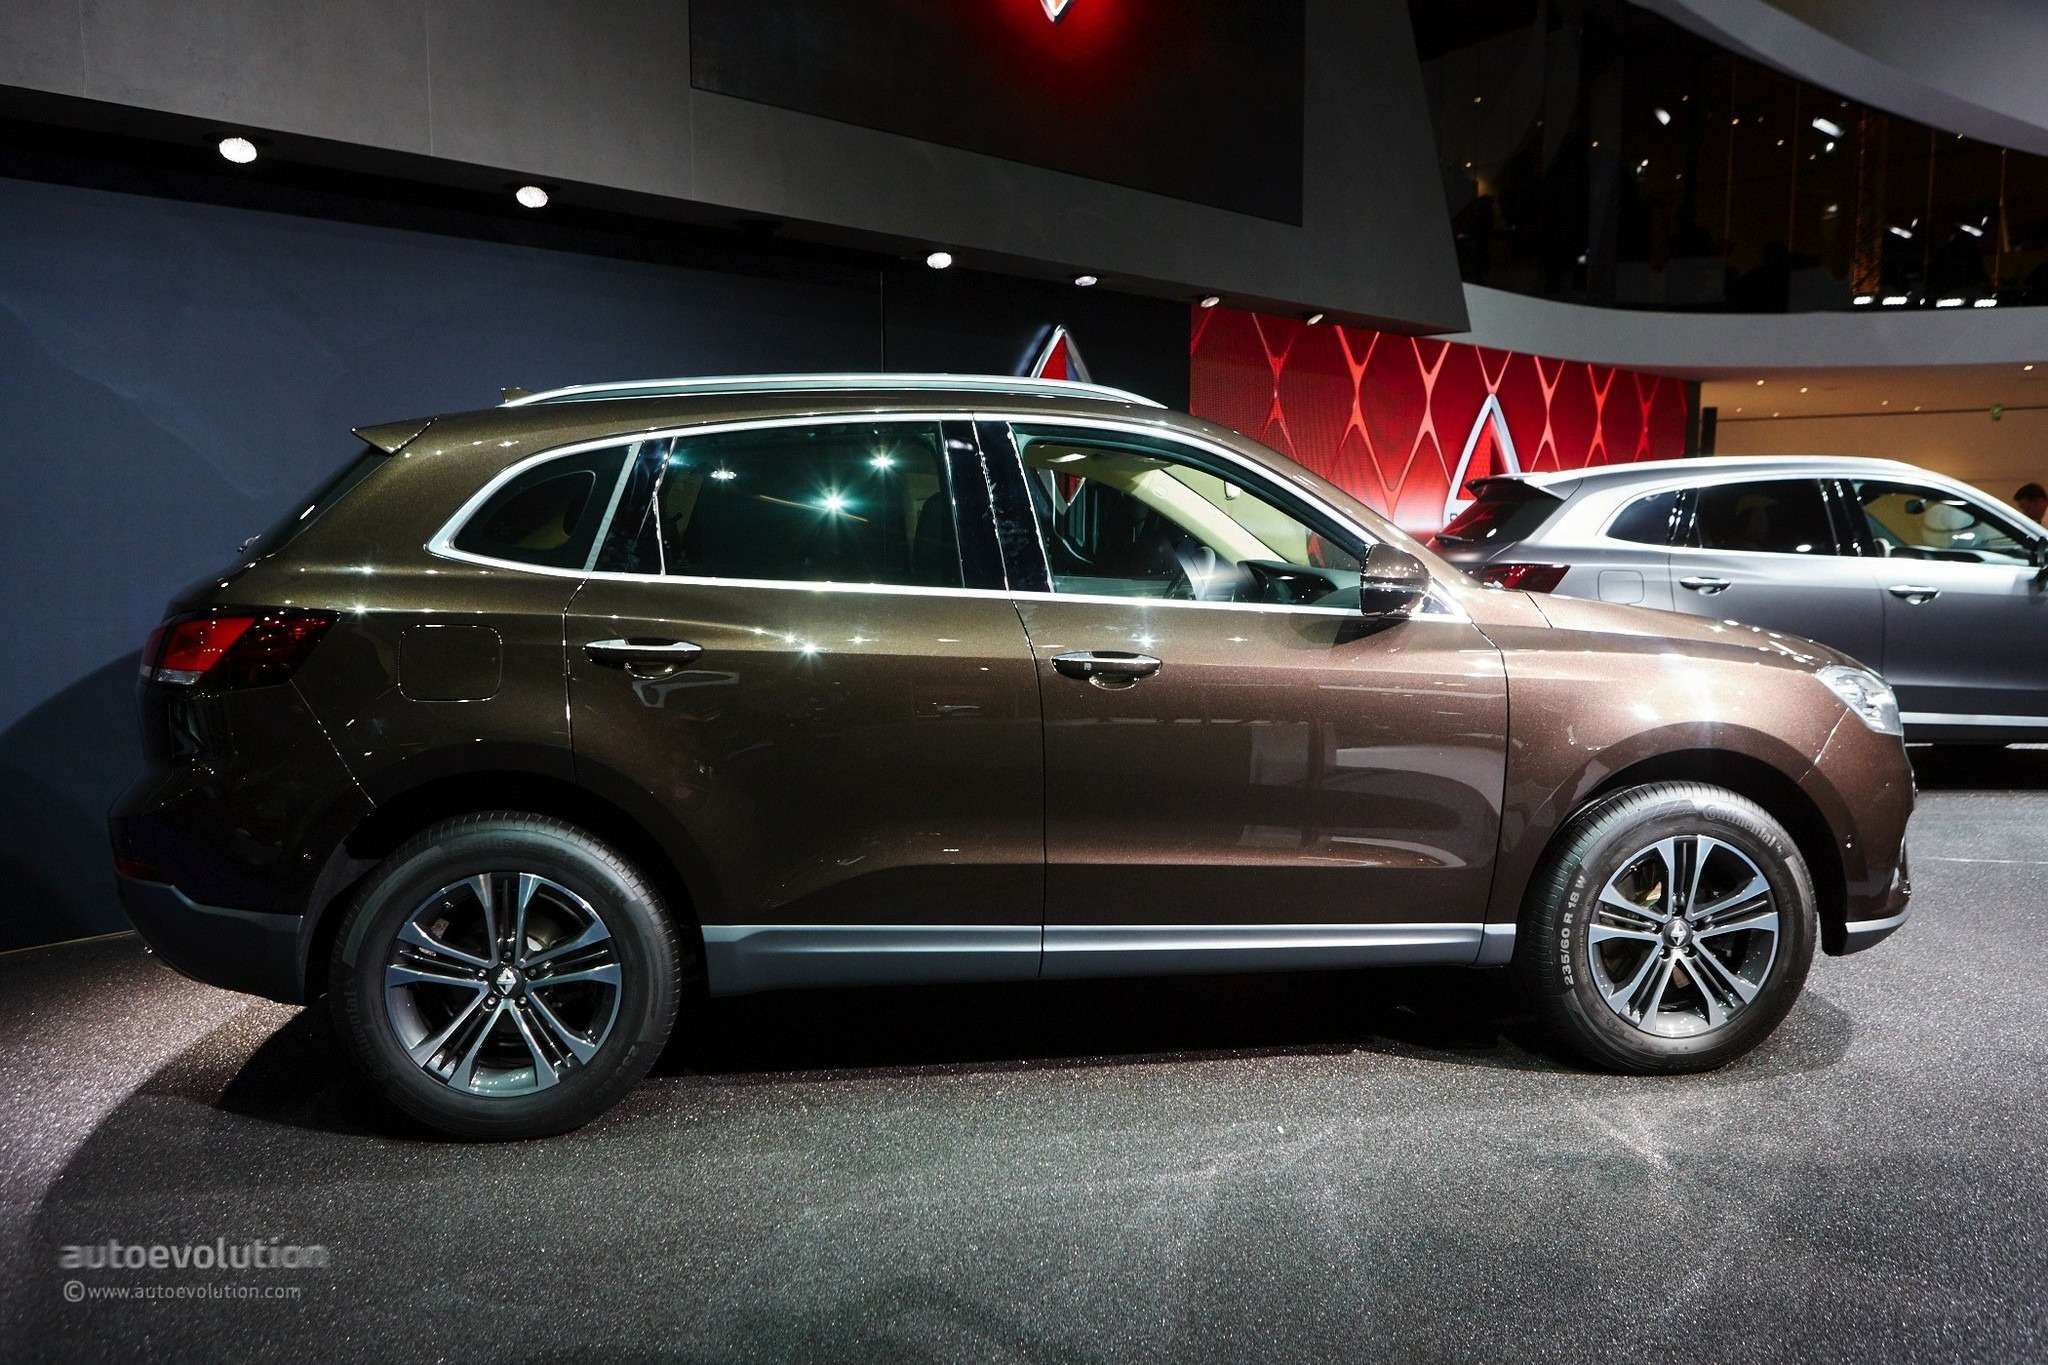 borgward-is-officially-back-with-its-bx7-suv-in-frankfurt-live-photos_20